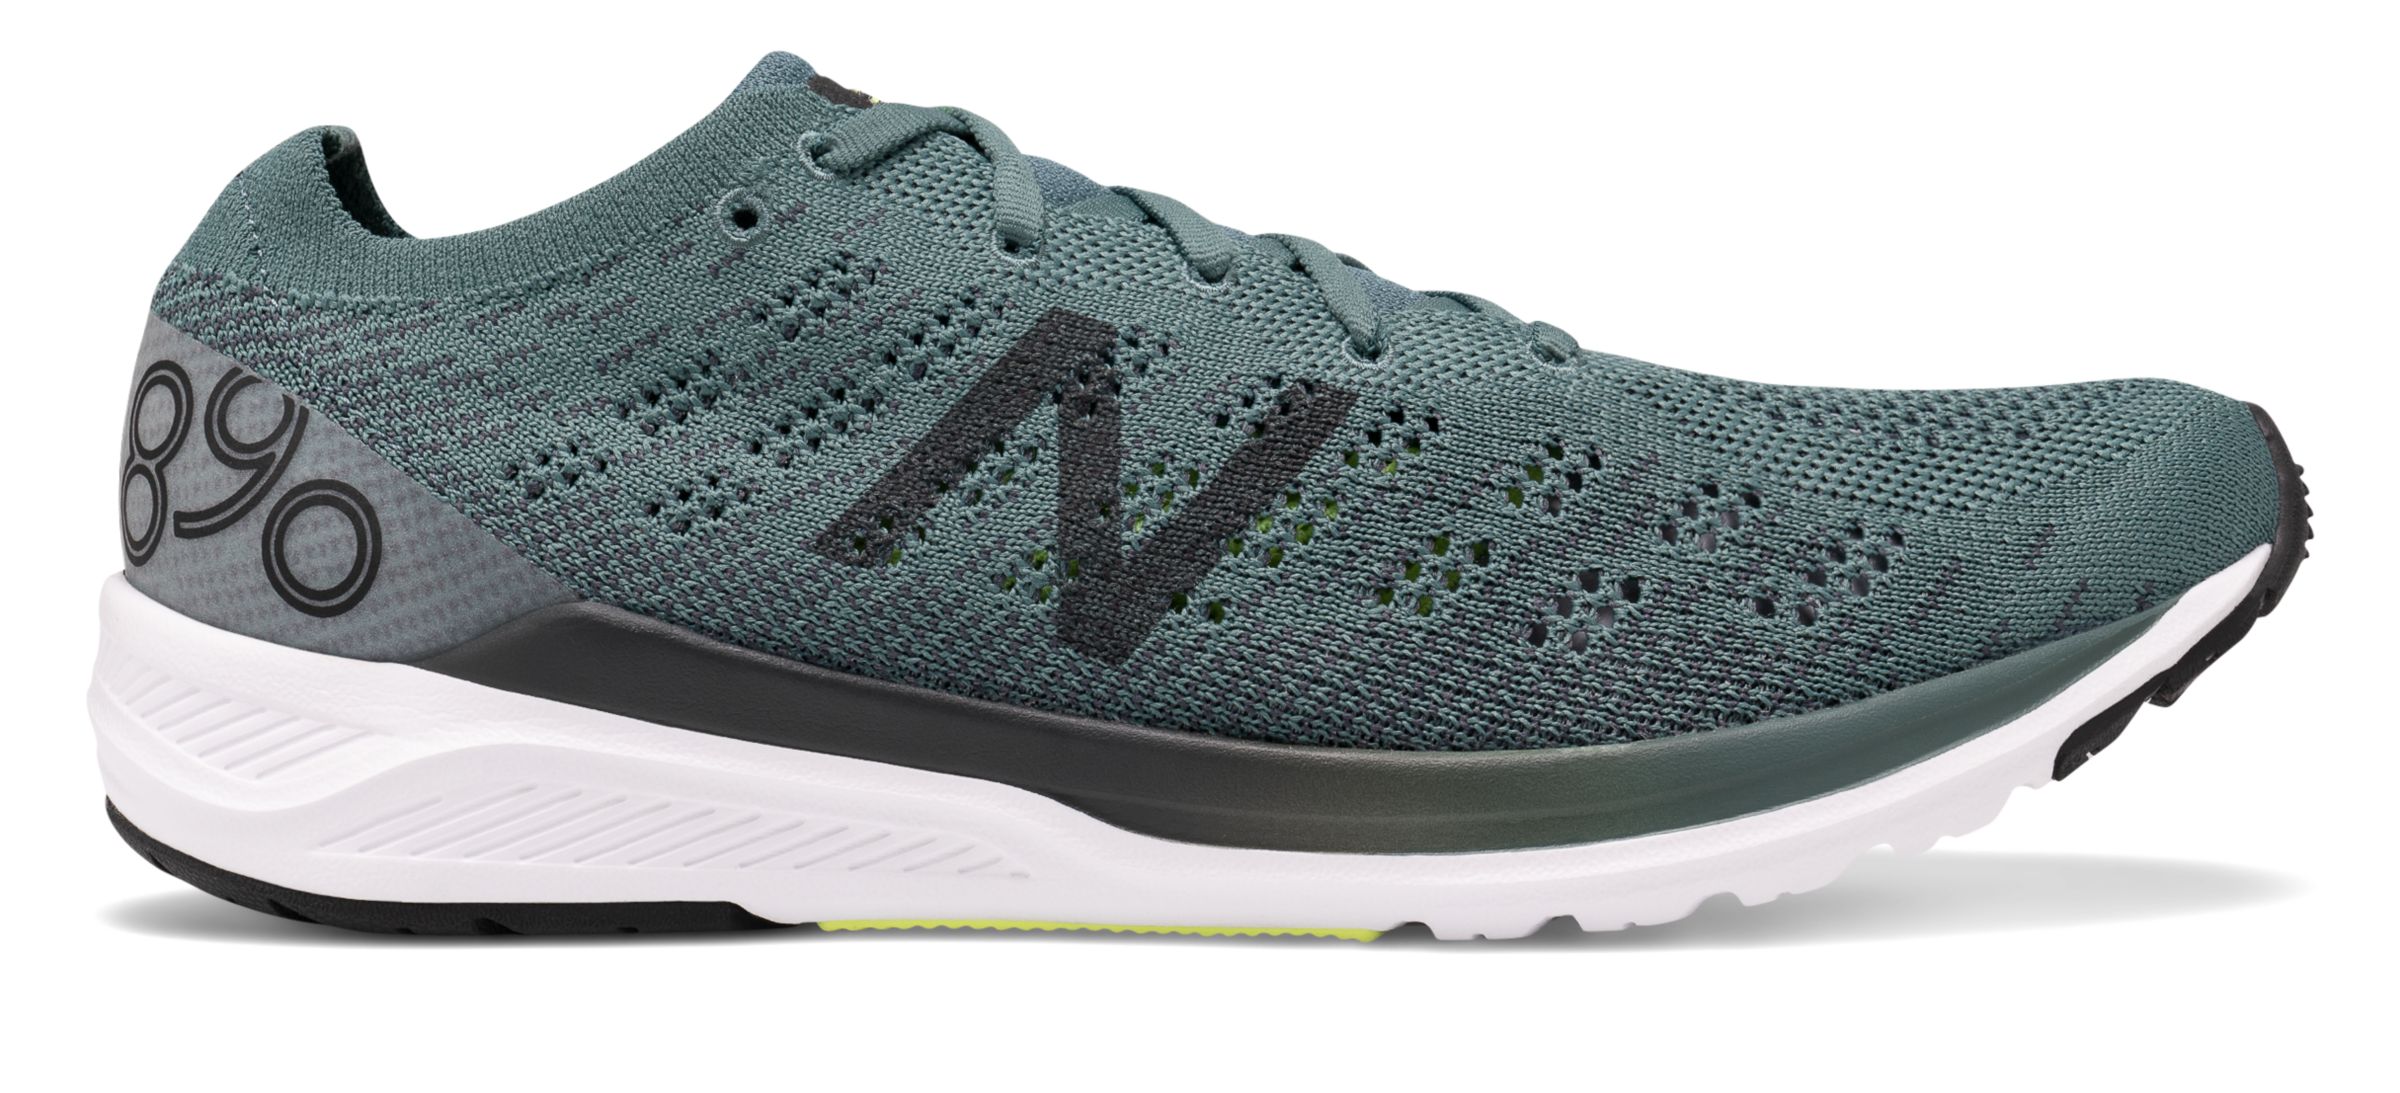 New Balance M890V7-23654-M on Sale - Discounts Up to 40% Off on M890GG7 at  Joe's New Balance Outlet